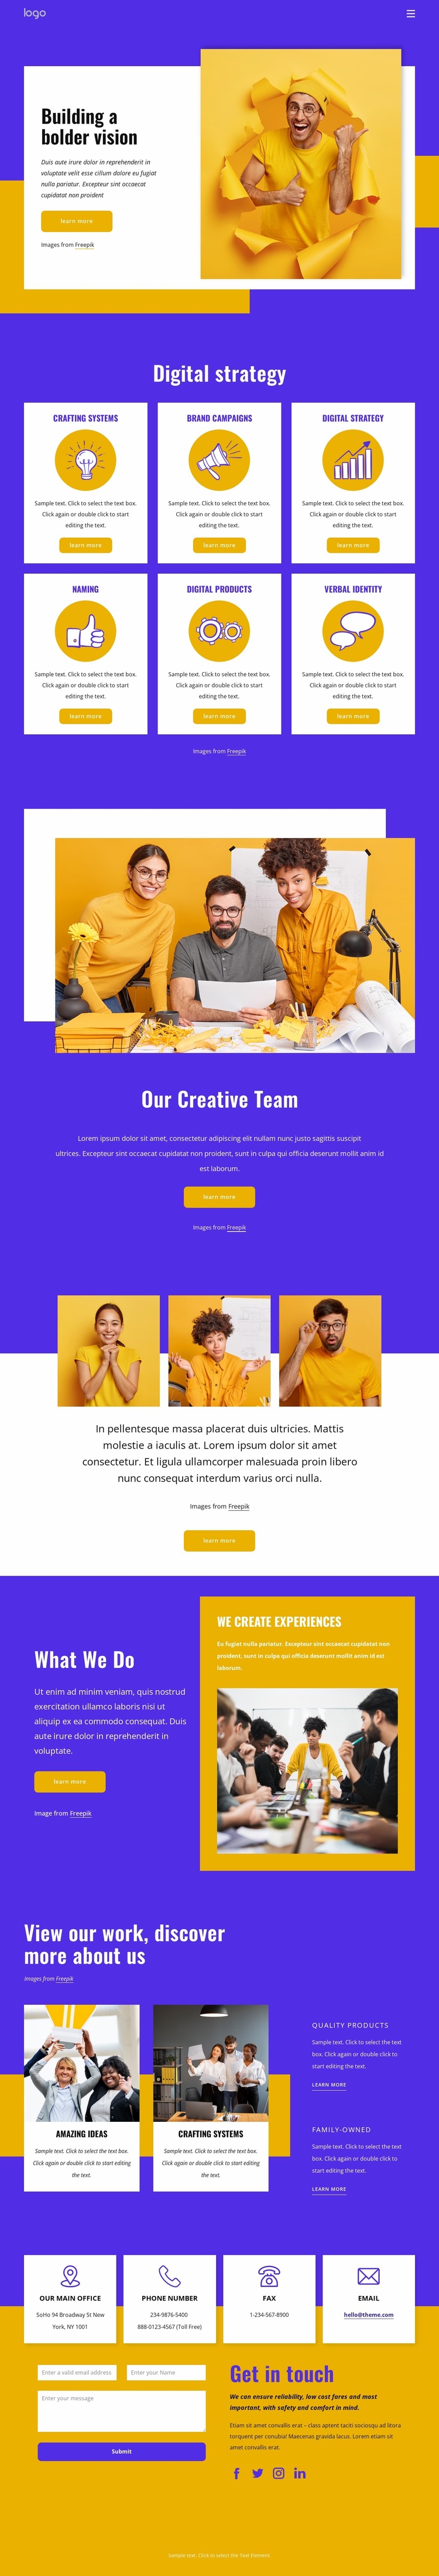 UX design and branding agency eCommerce Template